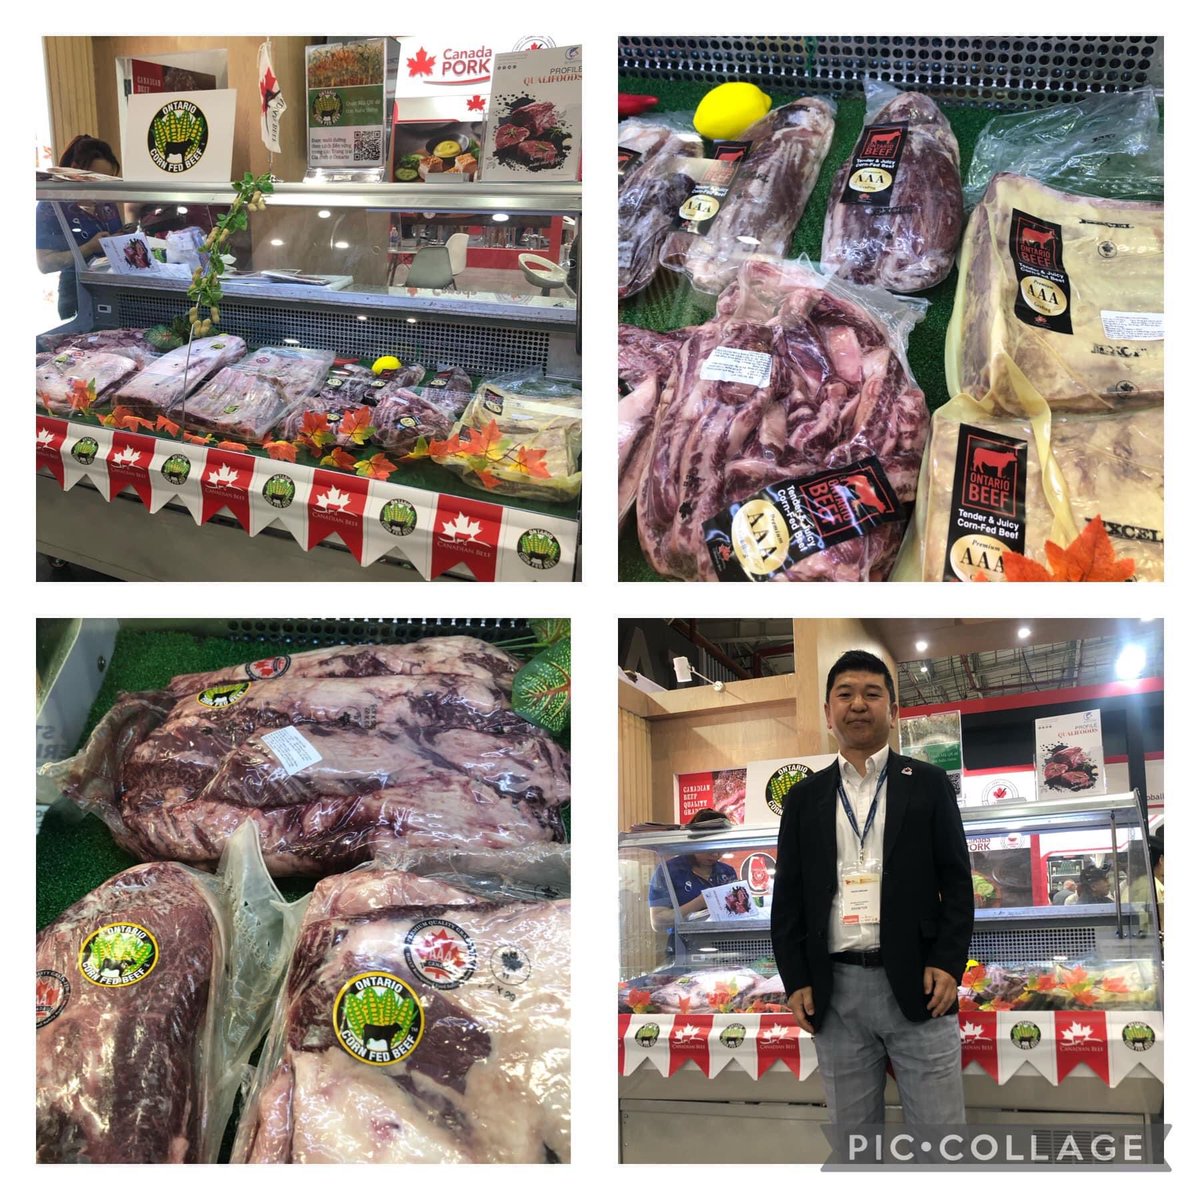 Ontario Beef on display at Food & Hotel Vietnam in Ho Chi Minh City. Vietnam is a strong growth market. ⁦@ONCornFedBeef⁩ ⁦@OMAFRA⁩ ⁦@BeefFarmersON⁩ ⁦@LisaThompsonPC⁩